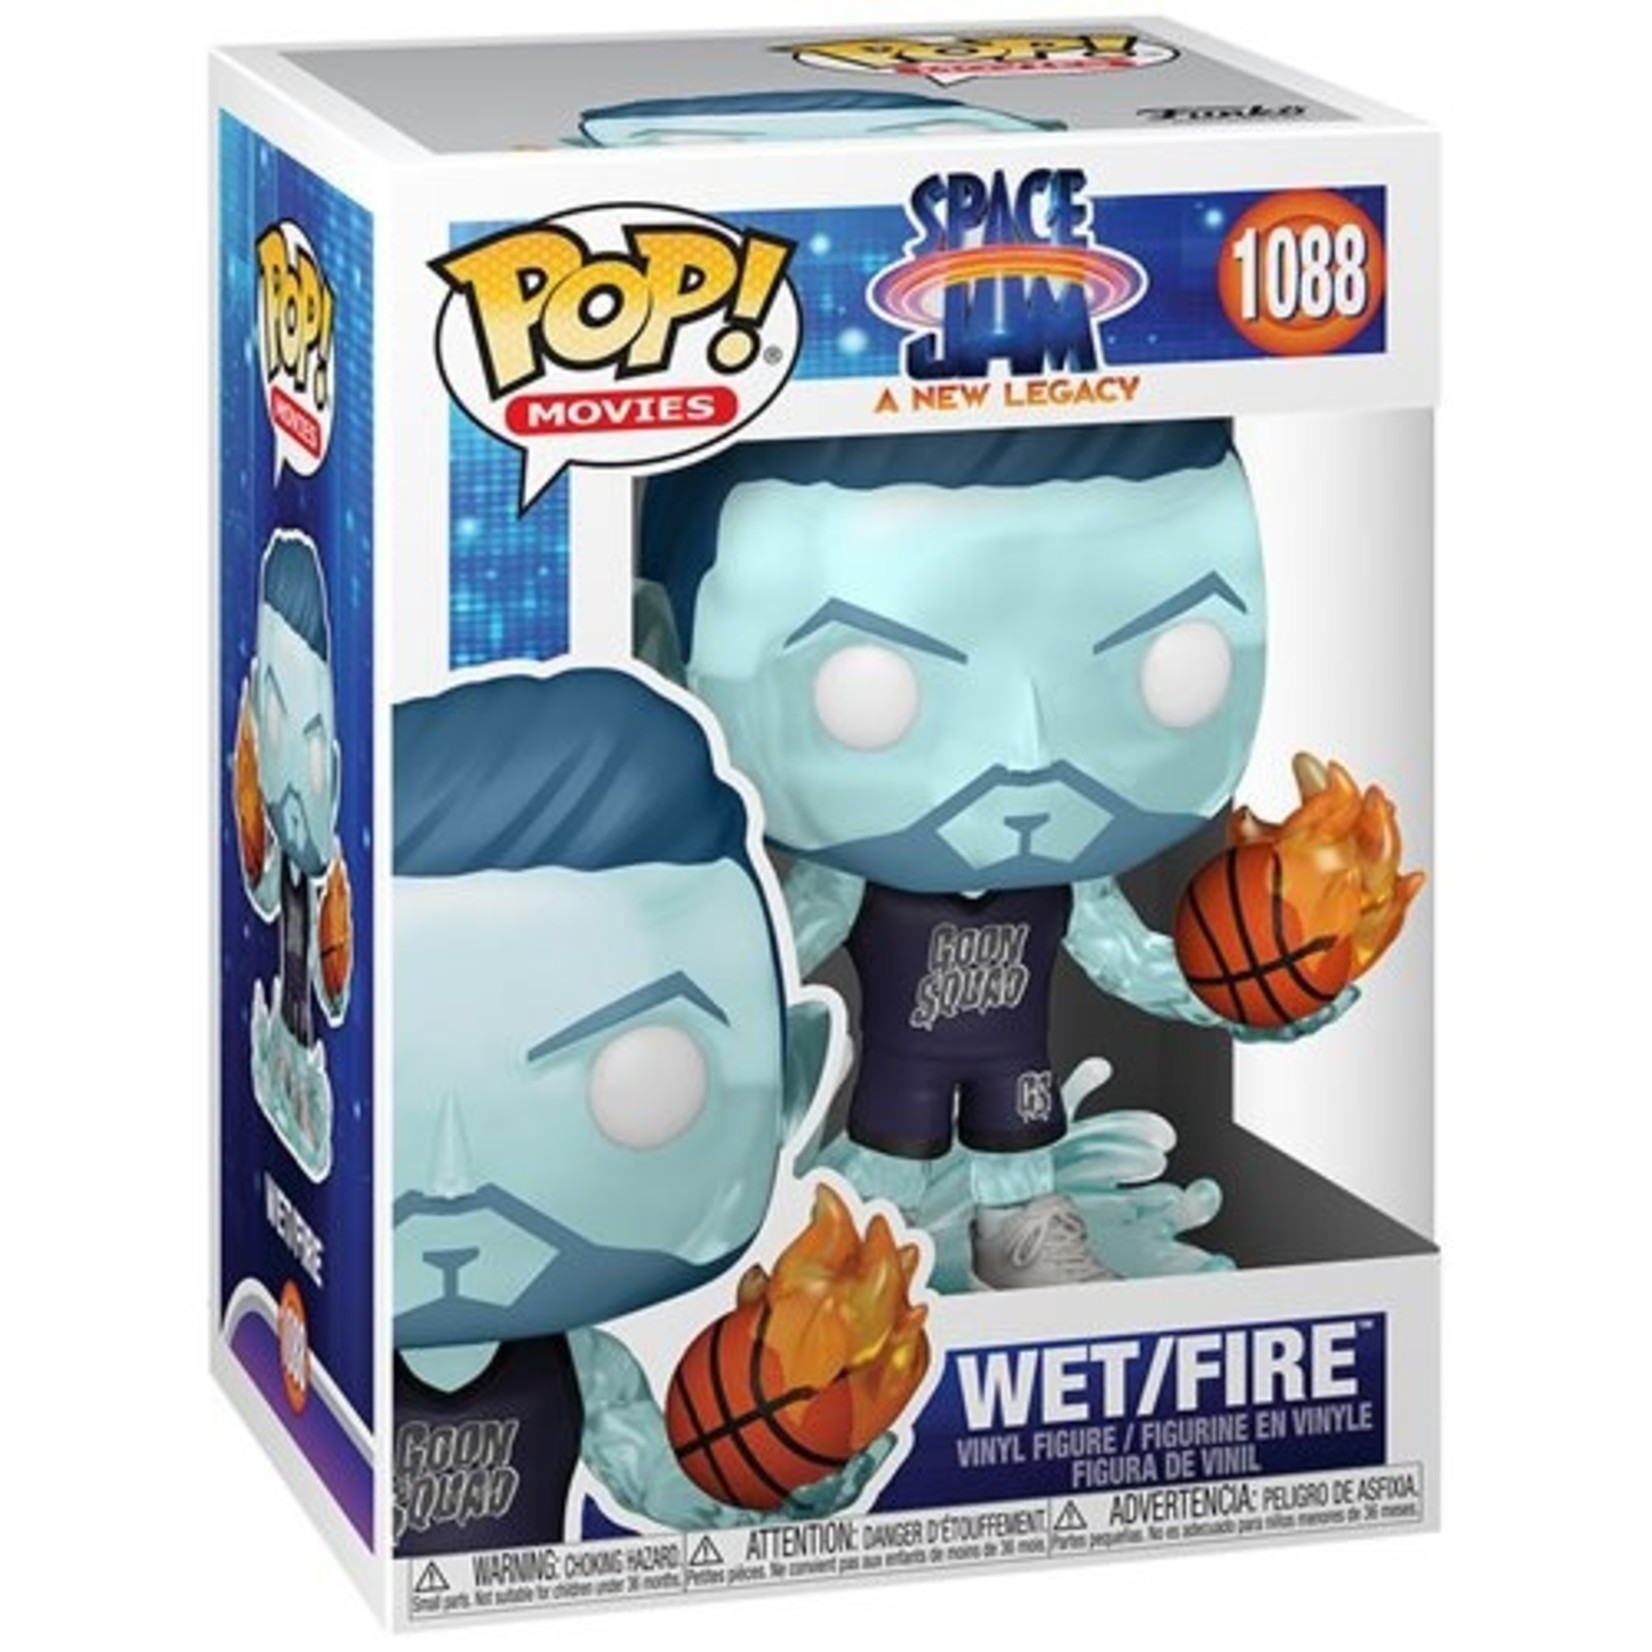 Funko Funko POP! Movies: Space Jam, A New Legacy - Wet/Fire